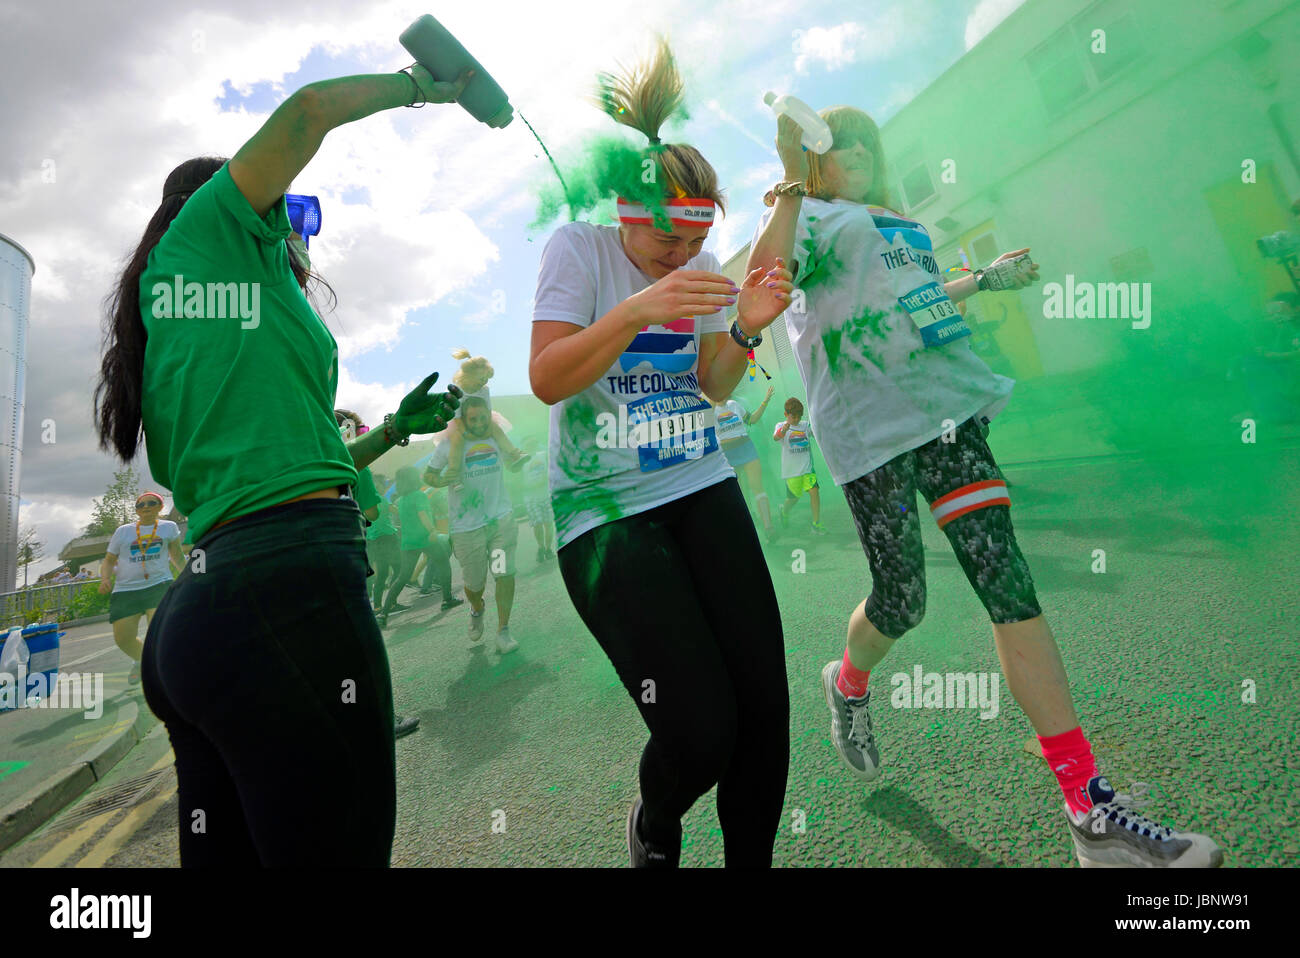 https://c8.alamy.com/comp/JBNW91/color-run-london-at-wembley-park-sprayed-showered-with-coloured-powder-JBNW91.jpg